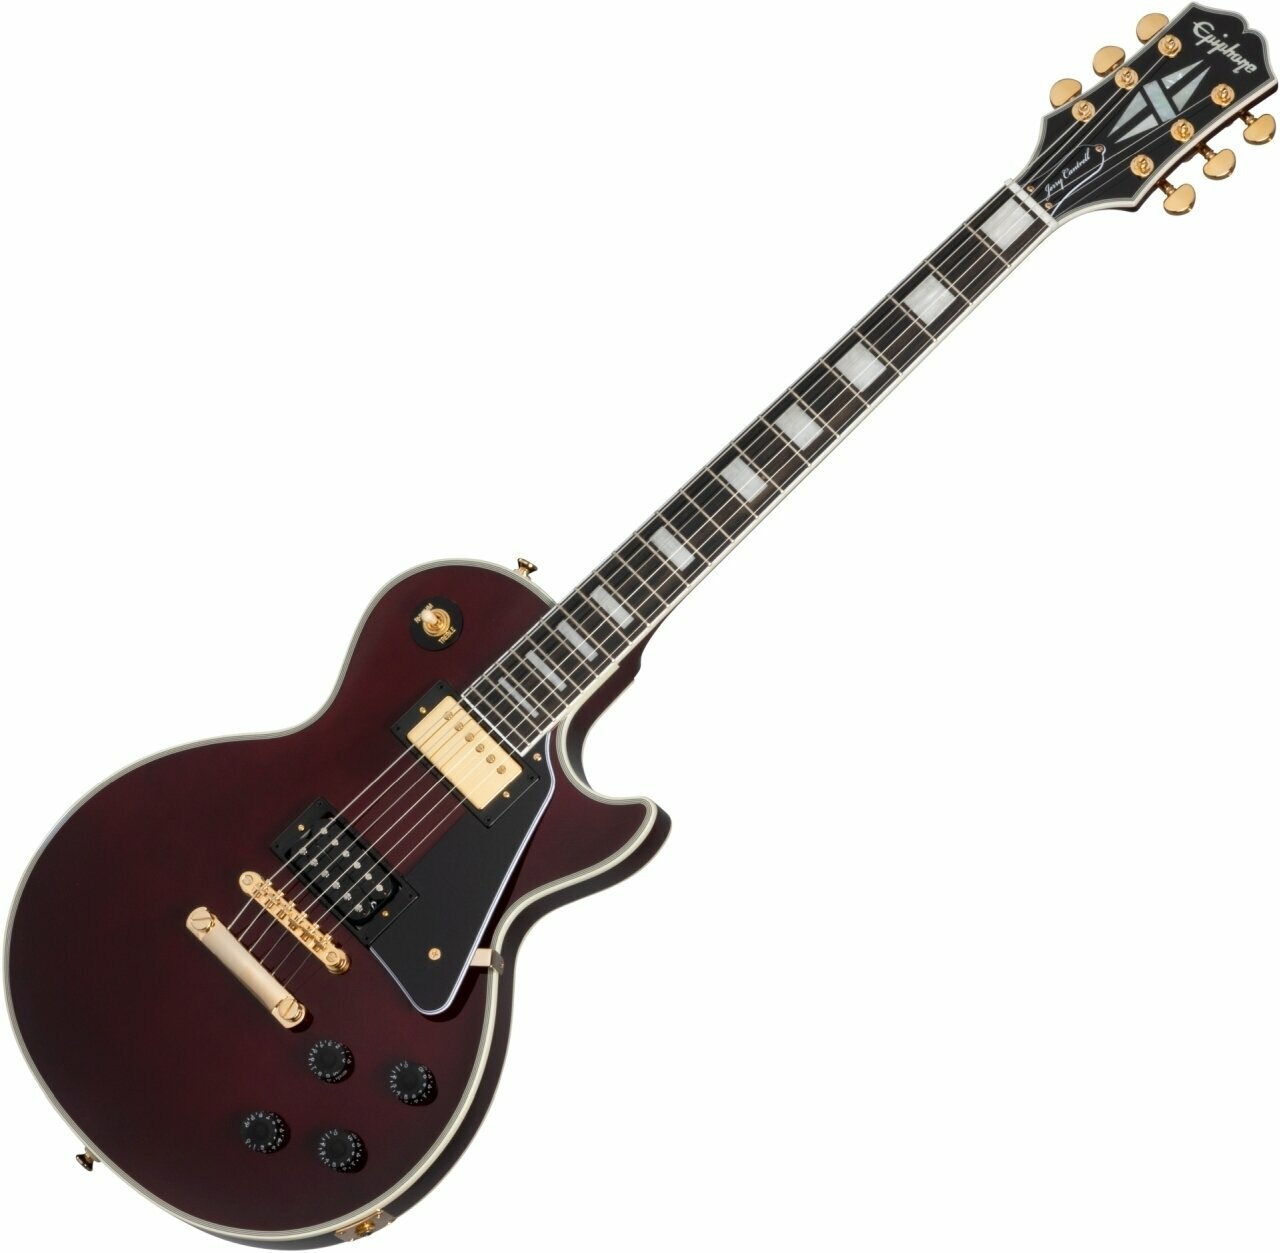 Guitare électrique Epiphone Jerry Cantrell "Wino" Les Paul Custom Dark Wine Red